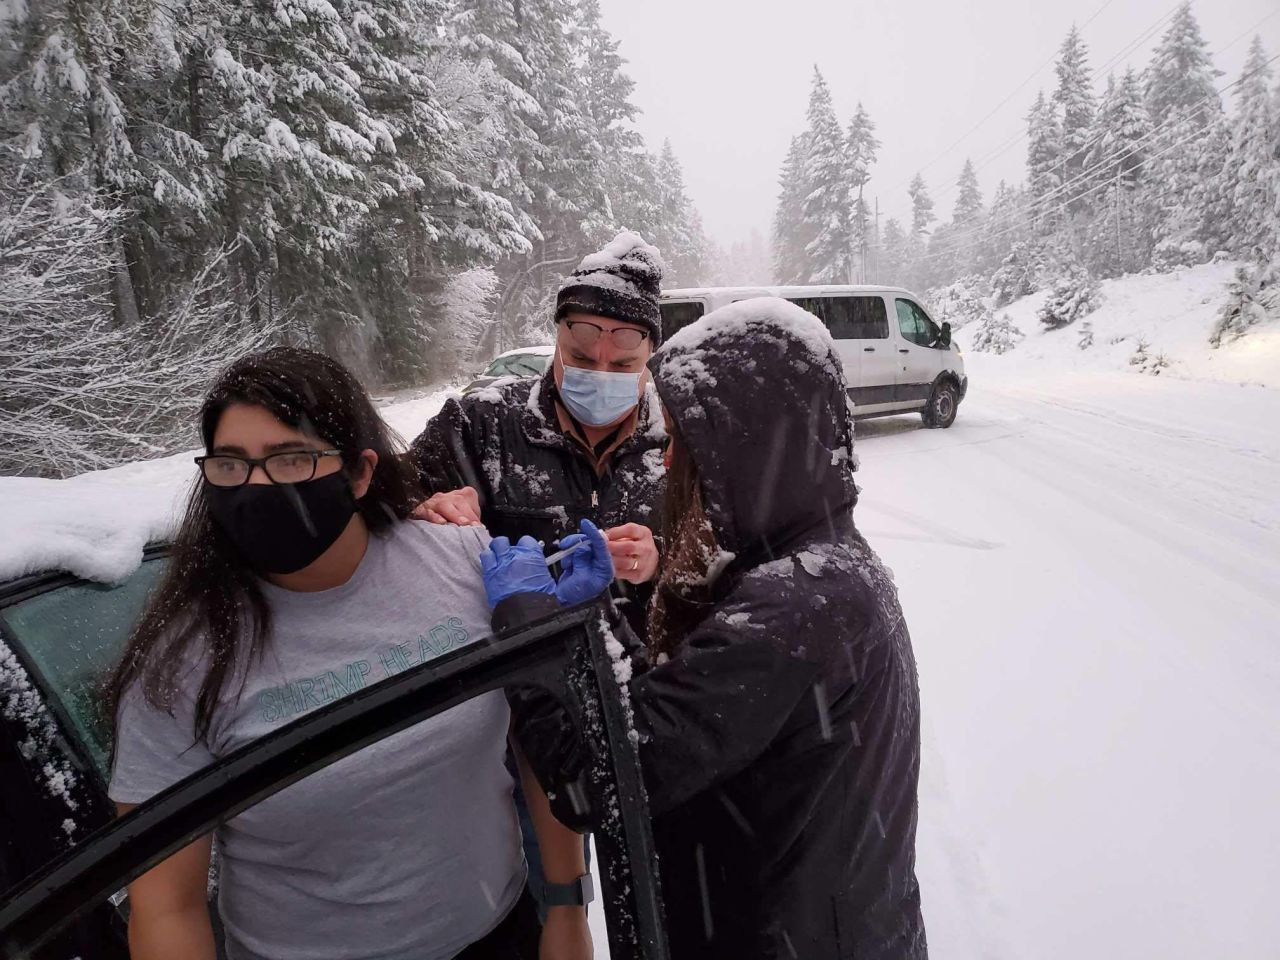 Public health workers from Oregon's Josephine County administered leftover doses of the Covid-19 vaccine to some motorists who, like them, <a href="https://www.cnn.com/world/live-news/coronavirus-pandemic-vaccine-updates-01-28-21/h_bc9414667d9ed69dfdacd84ec92f3063" target="_blank">were stranded in a snowstorm</a> on Tuesday, January 26. The workers had six leftover doses and wanted to use them before they expired.